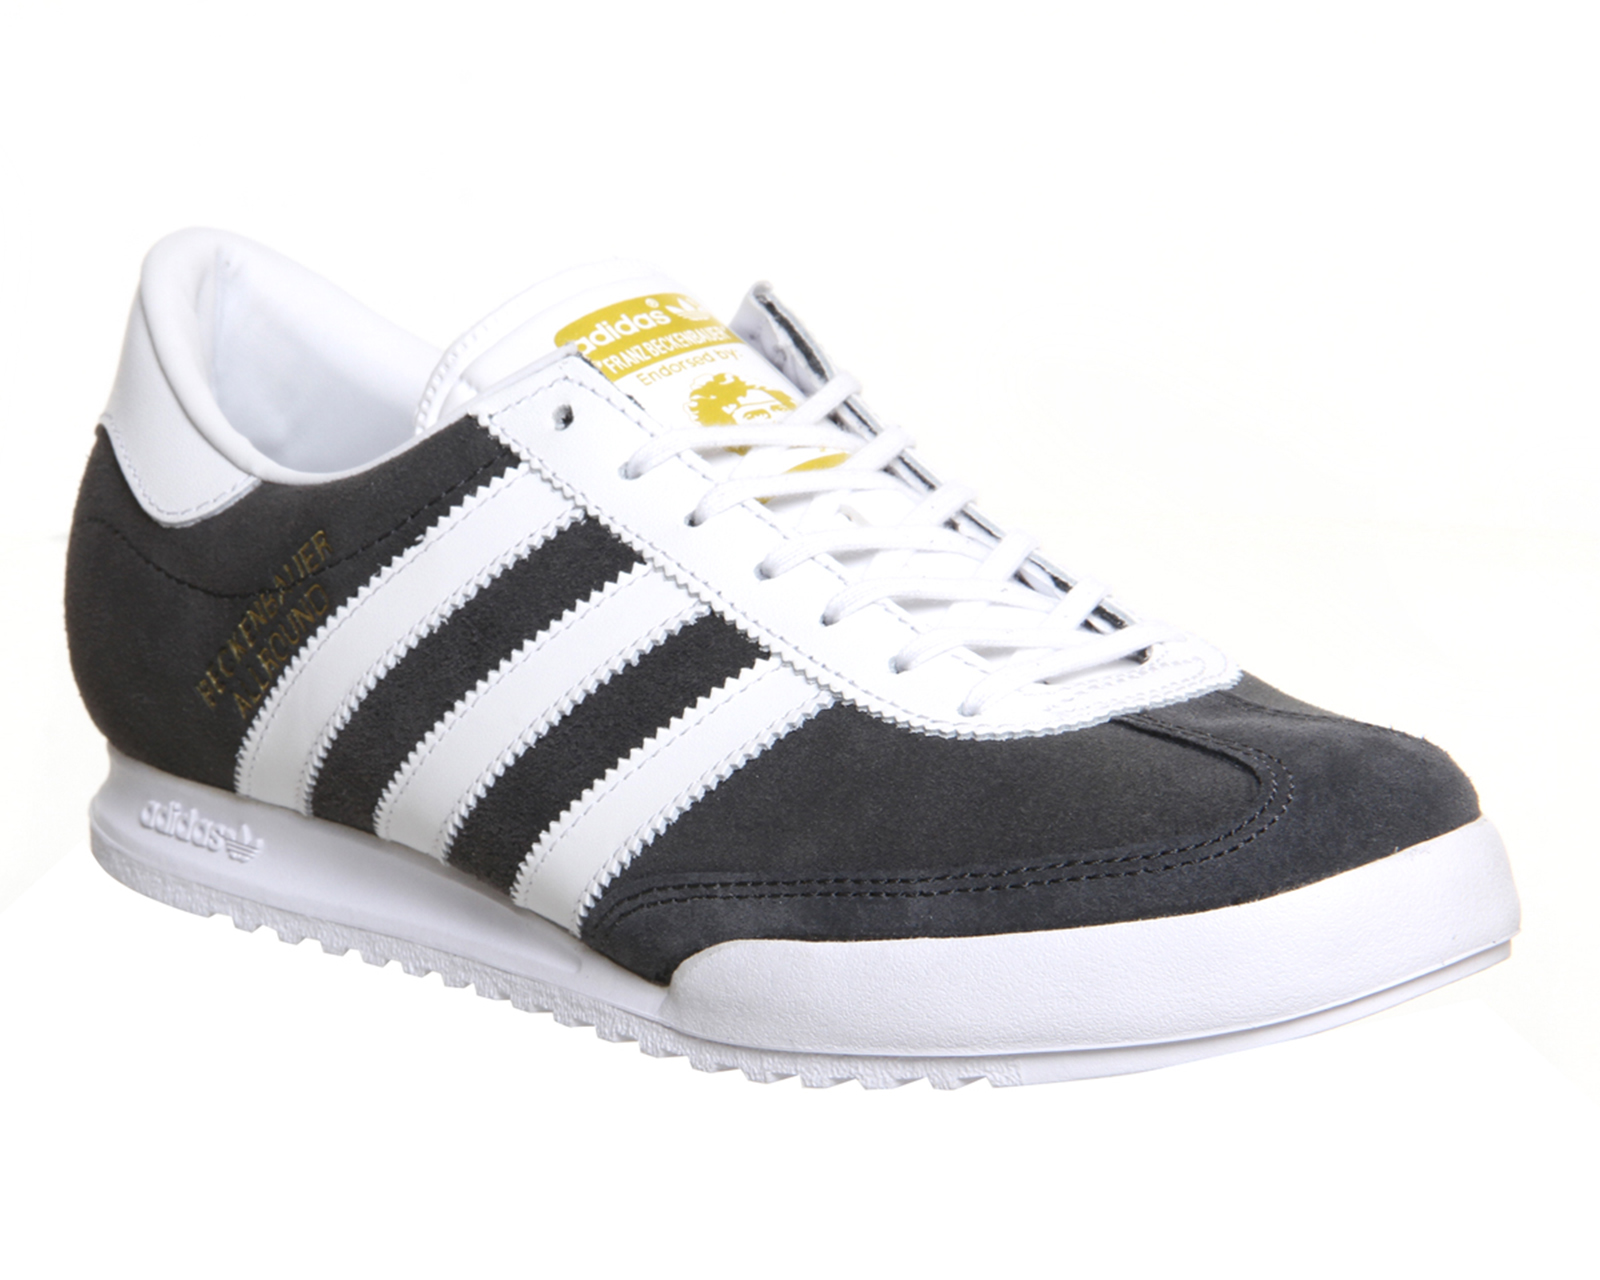 adidas Beckenbauer Dgh Solid Grey White - His trainers